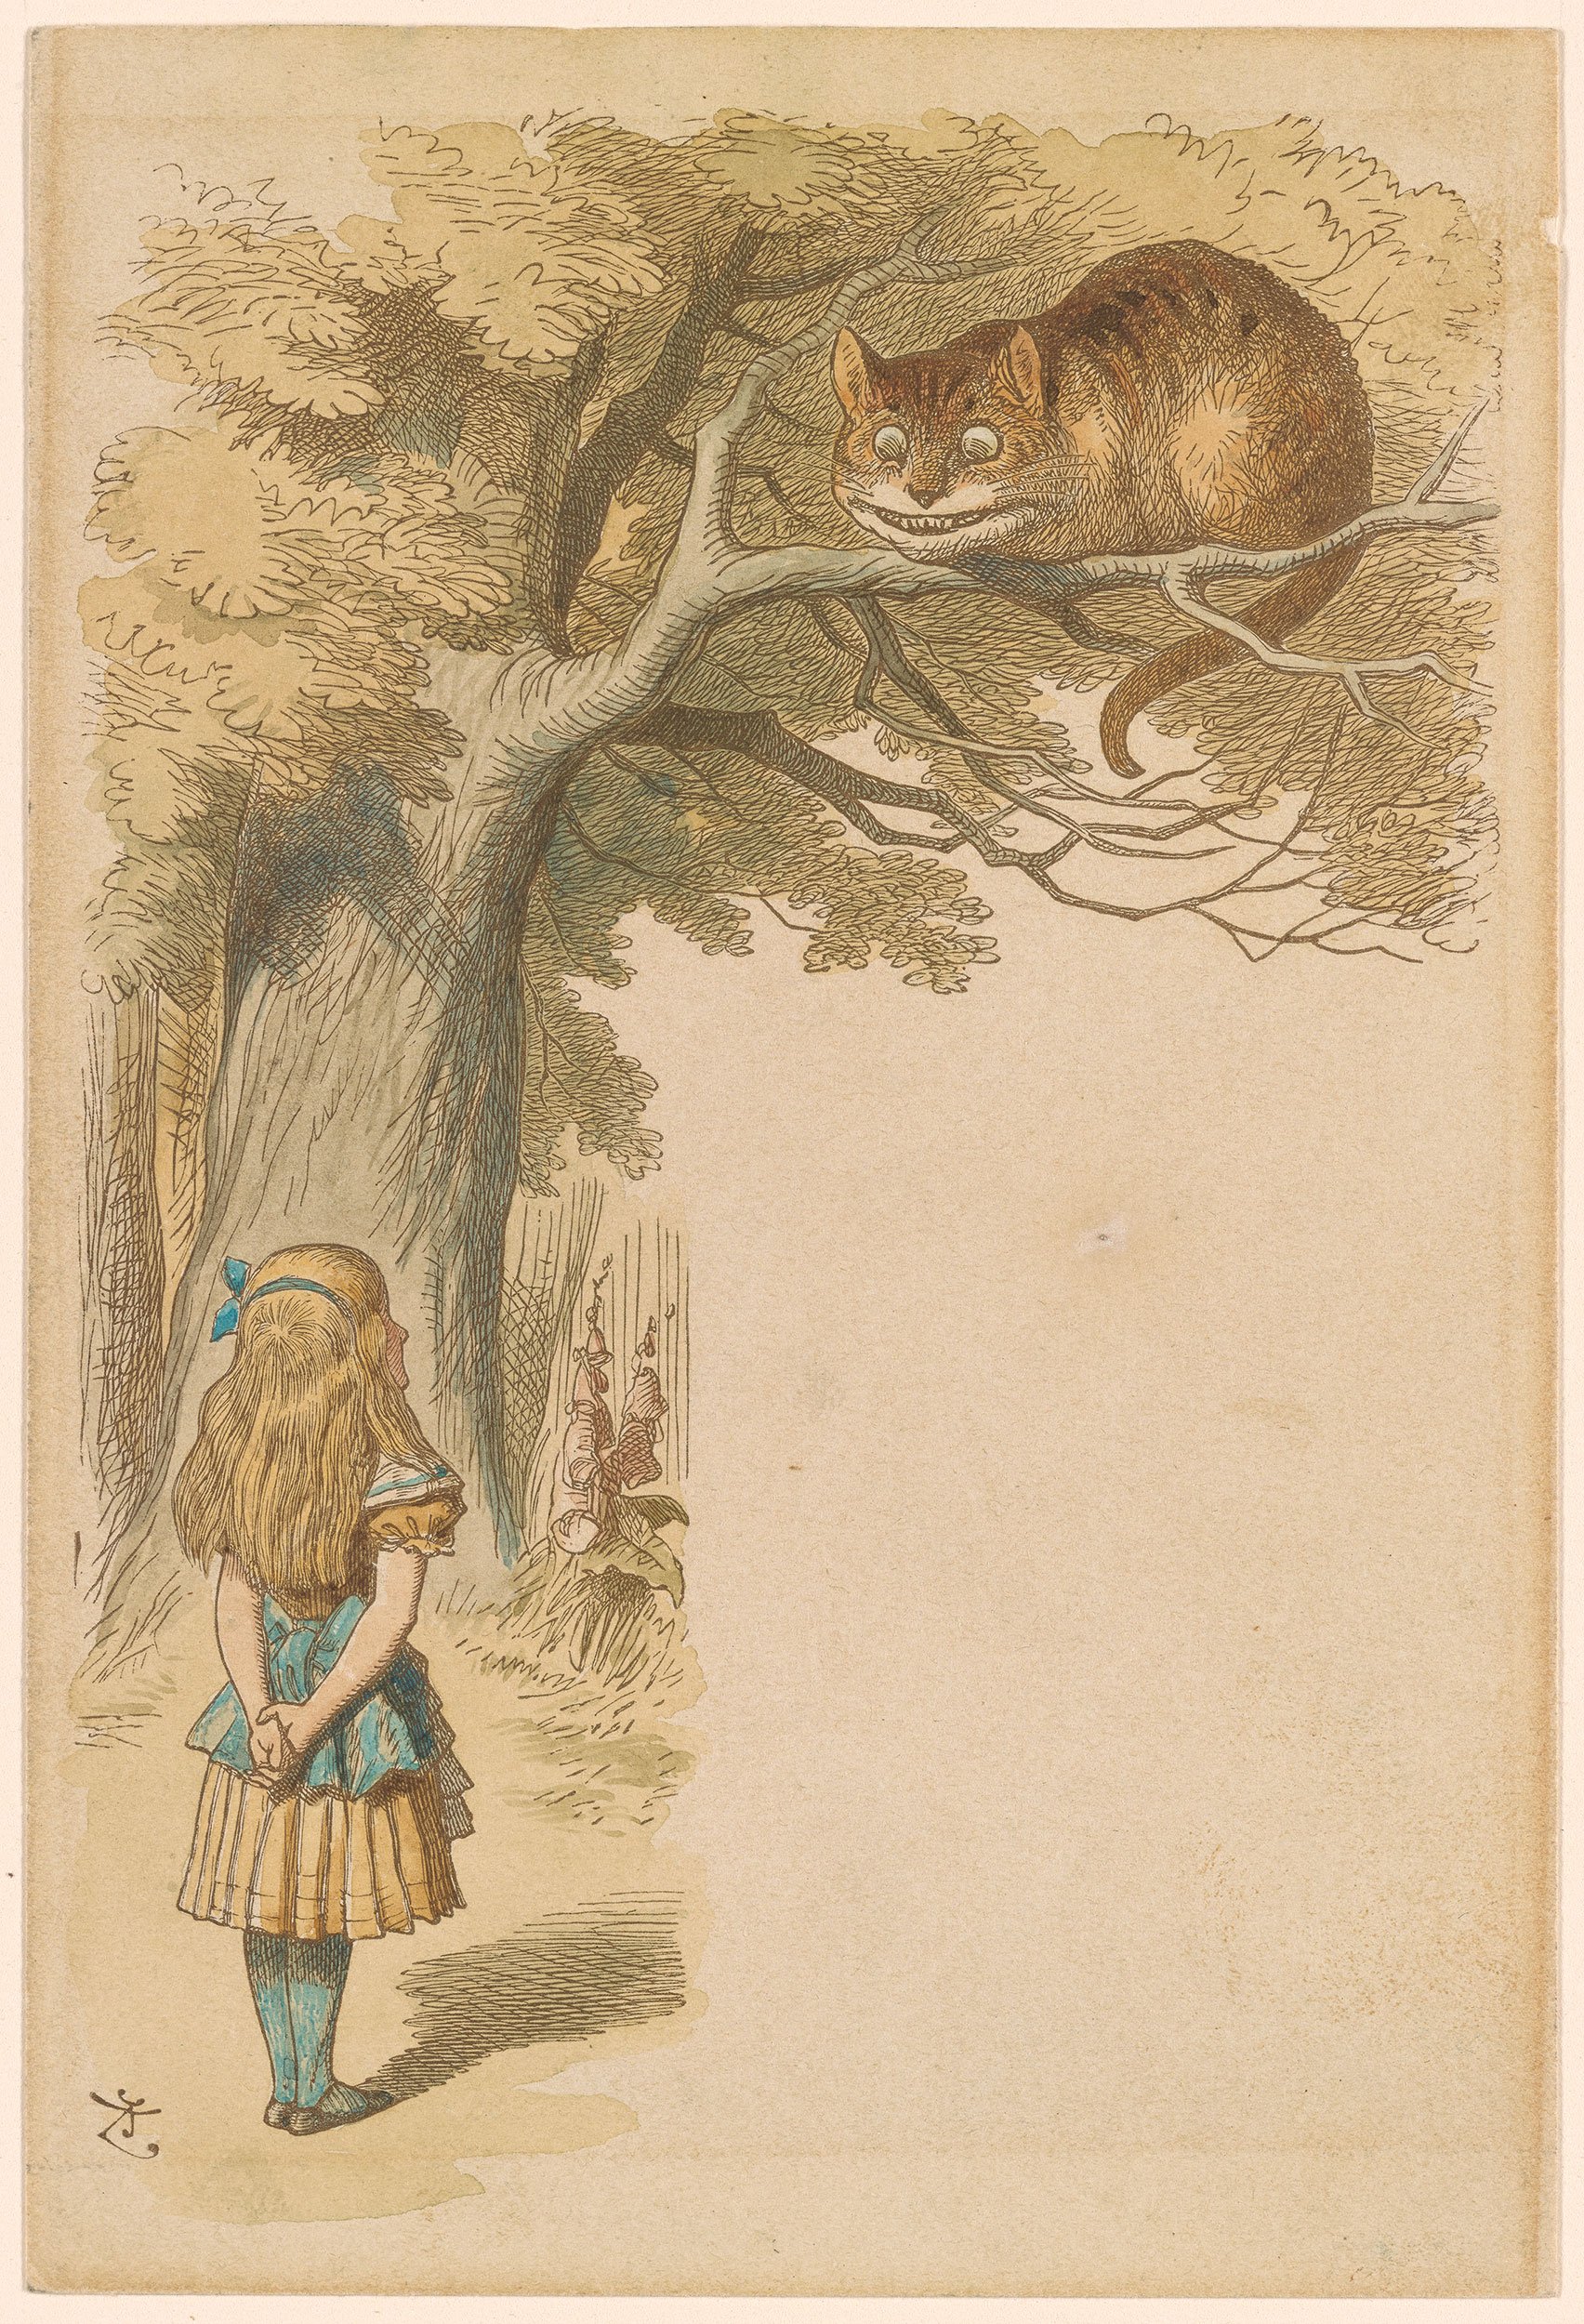 A large striped cat with big eyes and a wide mouth staring down at Alice from atop a tree.